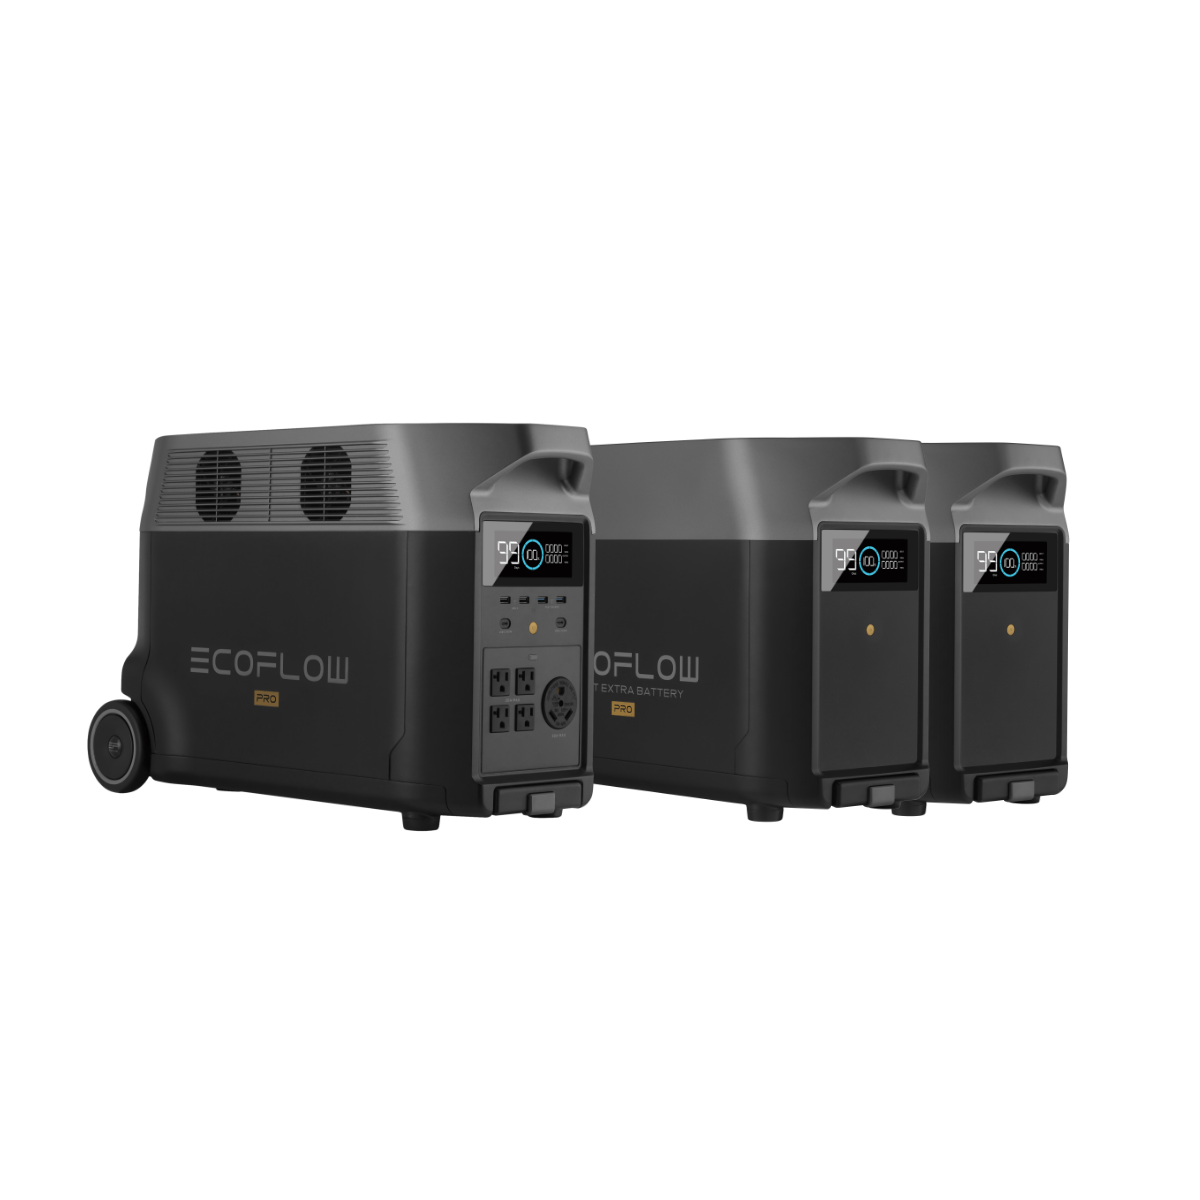 DELTA Pro Power Station Power Station EcoFlow Power Station + 2 Extra Batteries  